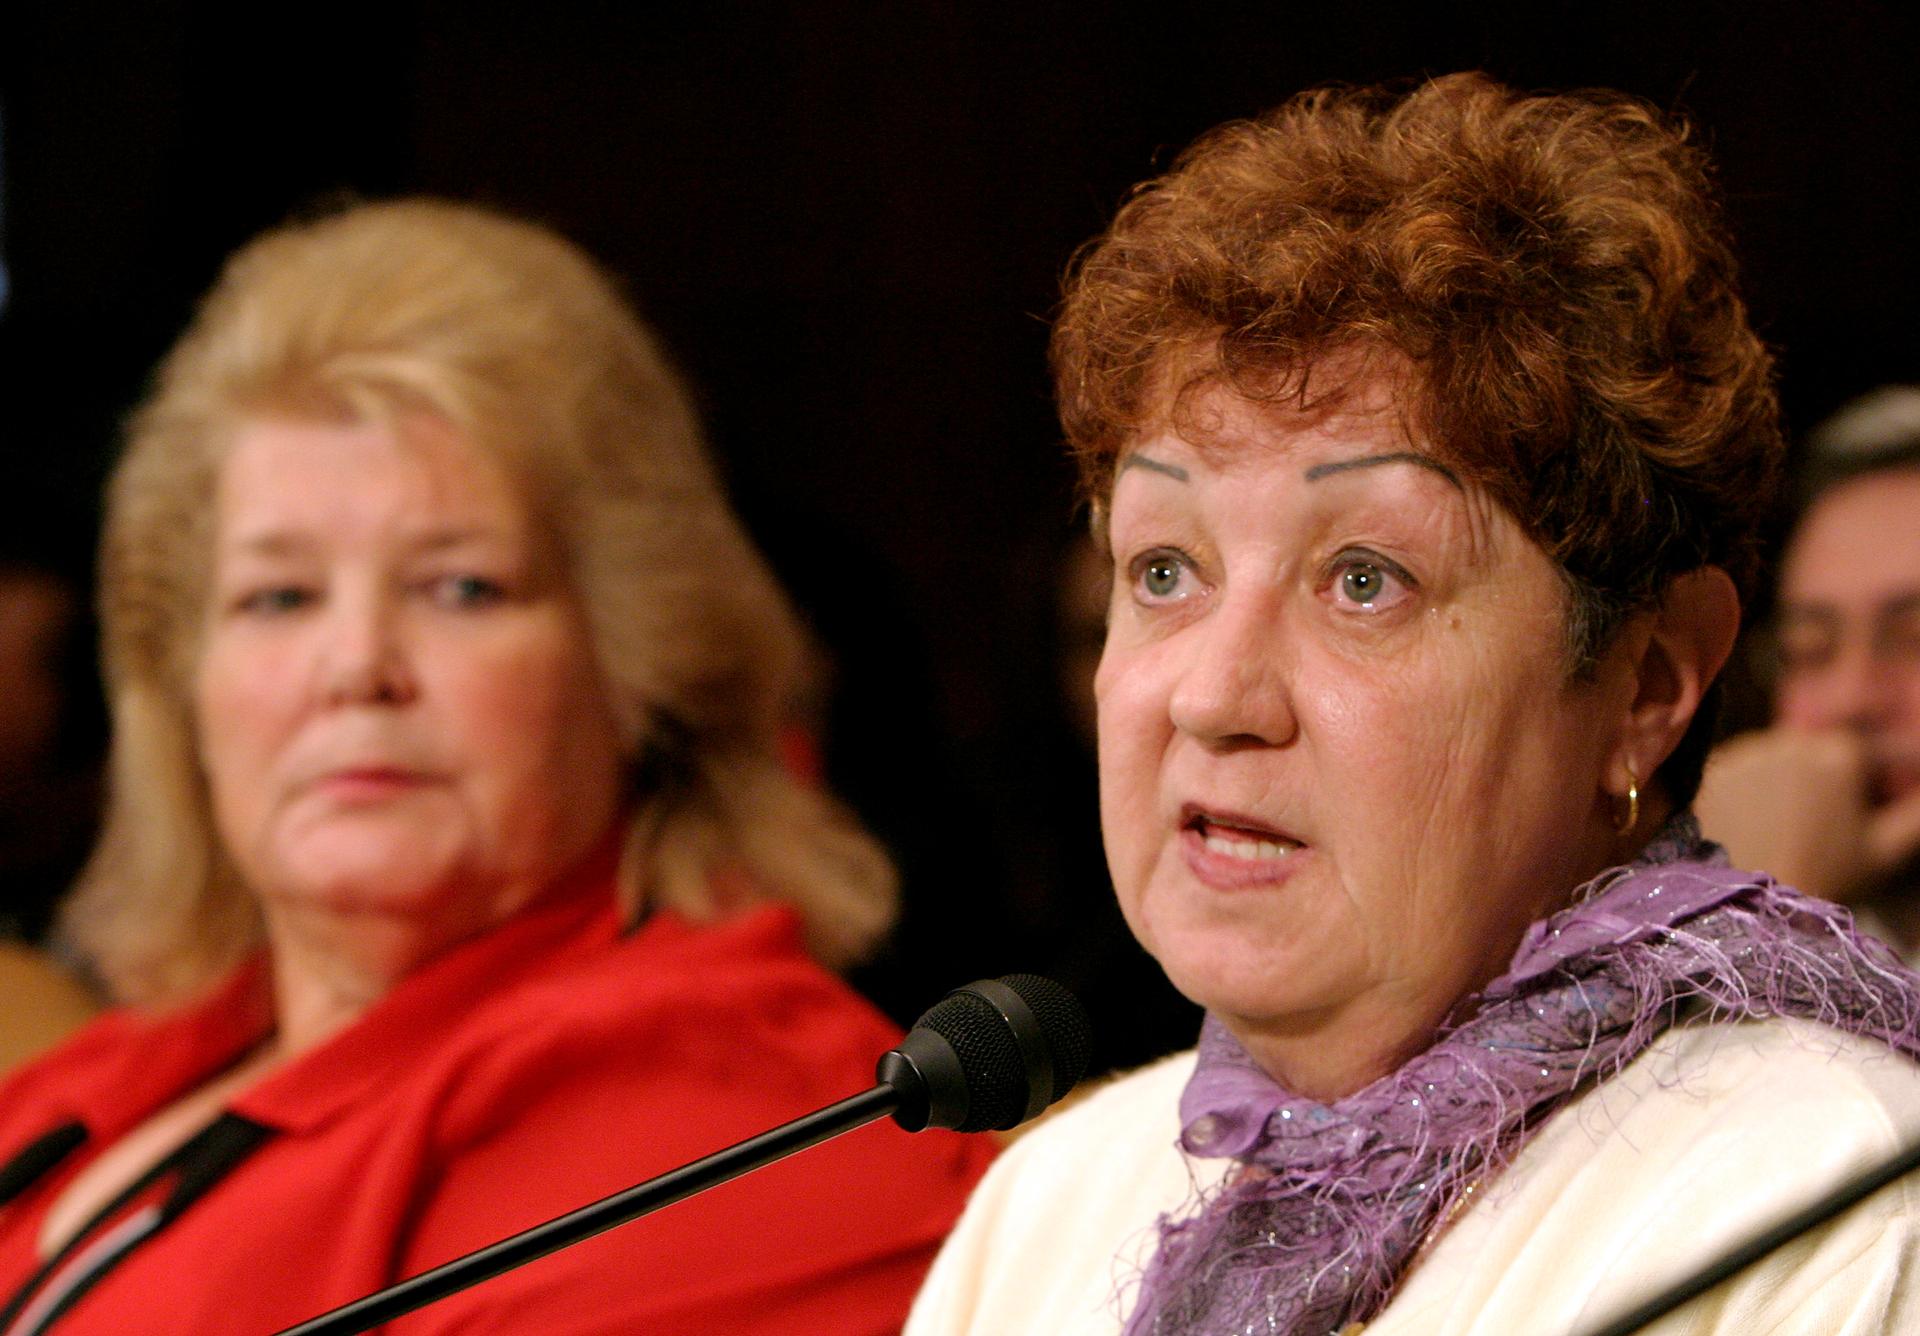 Norma McCorvey, the anonymous plaintiff known as Jane Roe in the Supreme Court's landmark 1973 Roe vs. Wade ruling 